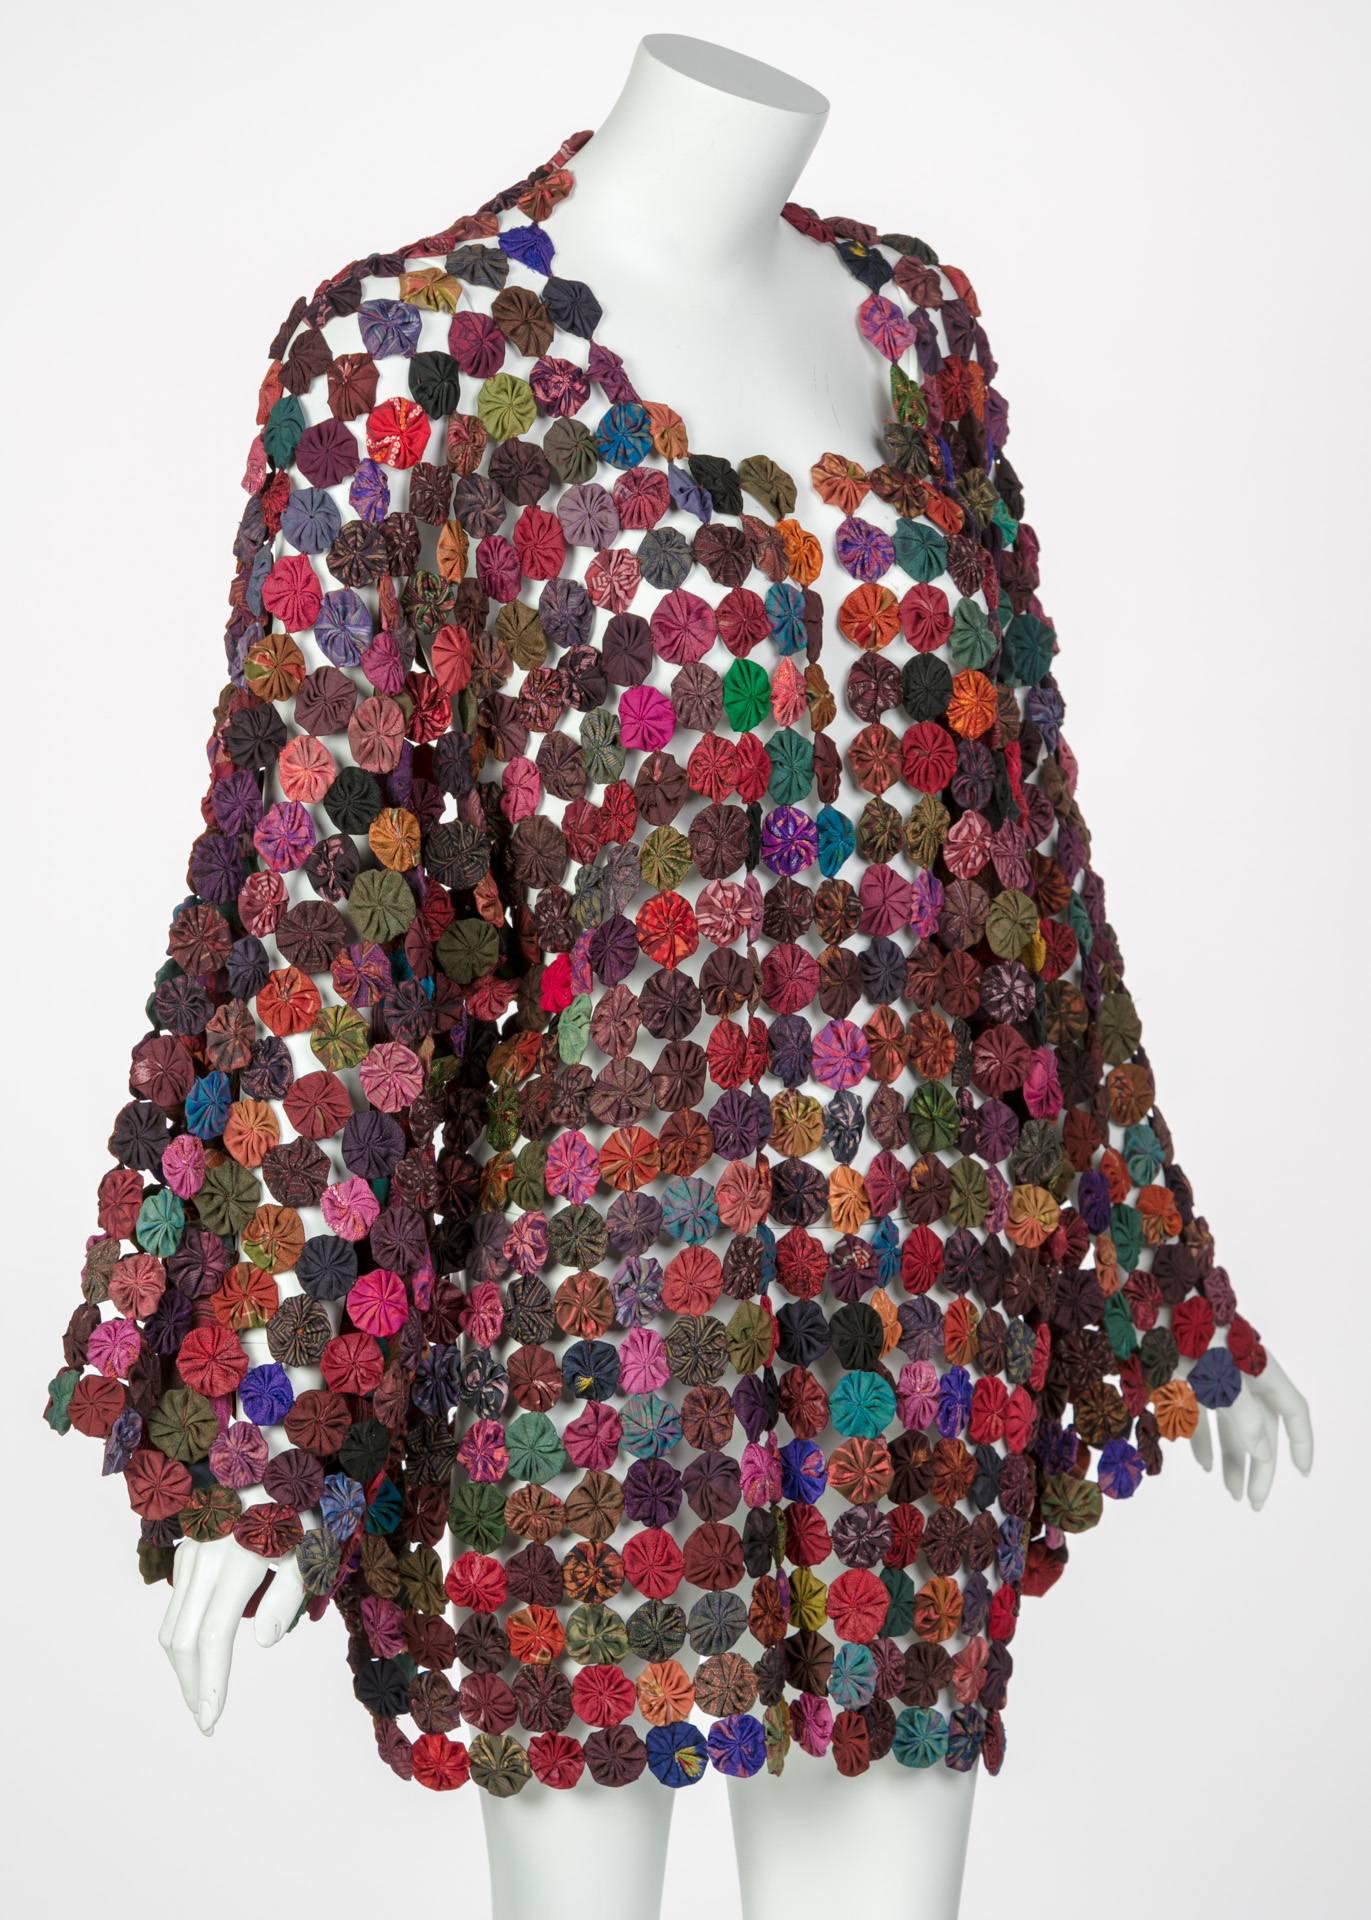 This technicolored, handstitched jacket is constructed of hundreds of circular rosettes or “yo-yos” through a needlework technique known as “yo-yo quilting” which derives its name from the yo-yo toy that was popularized in the United states in the